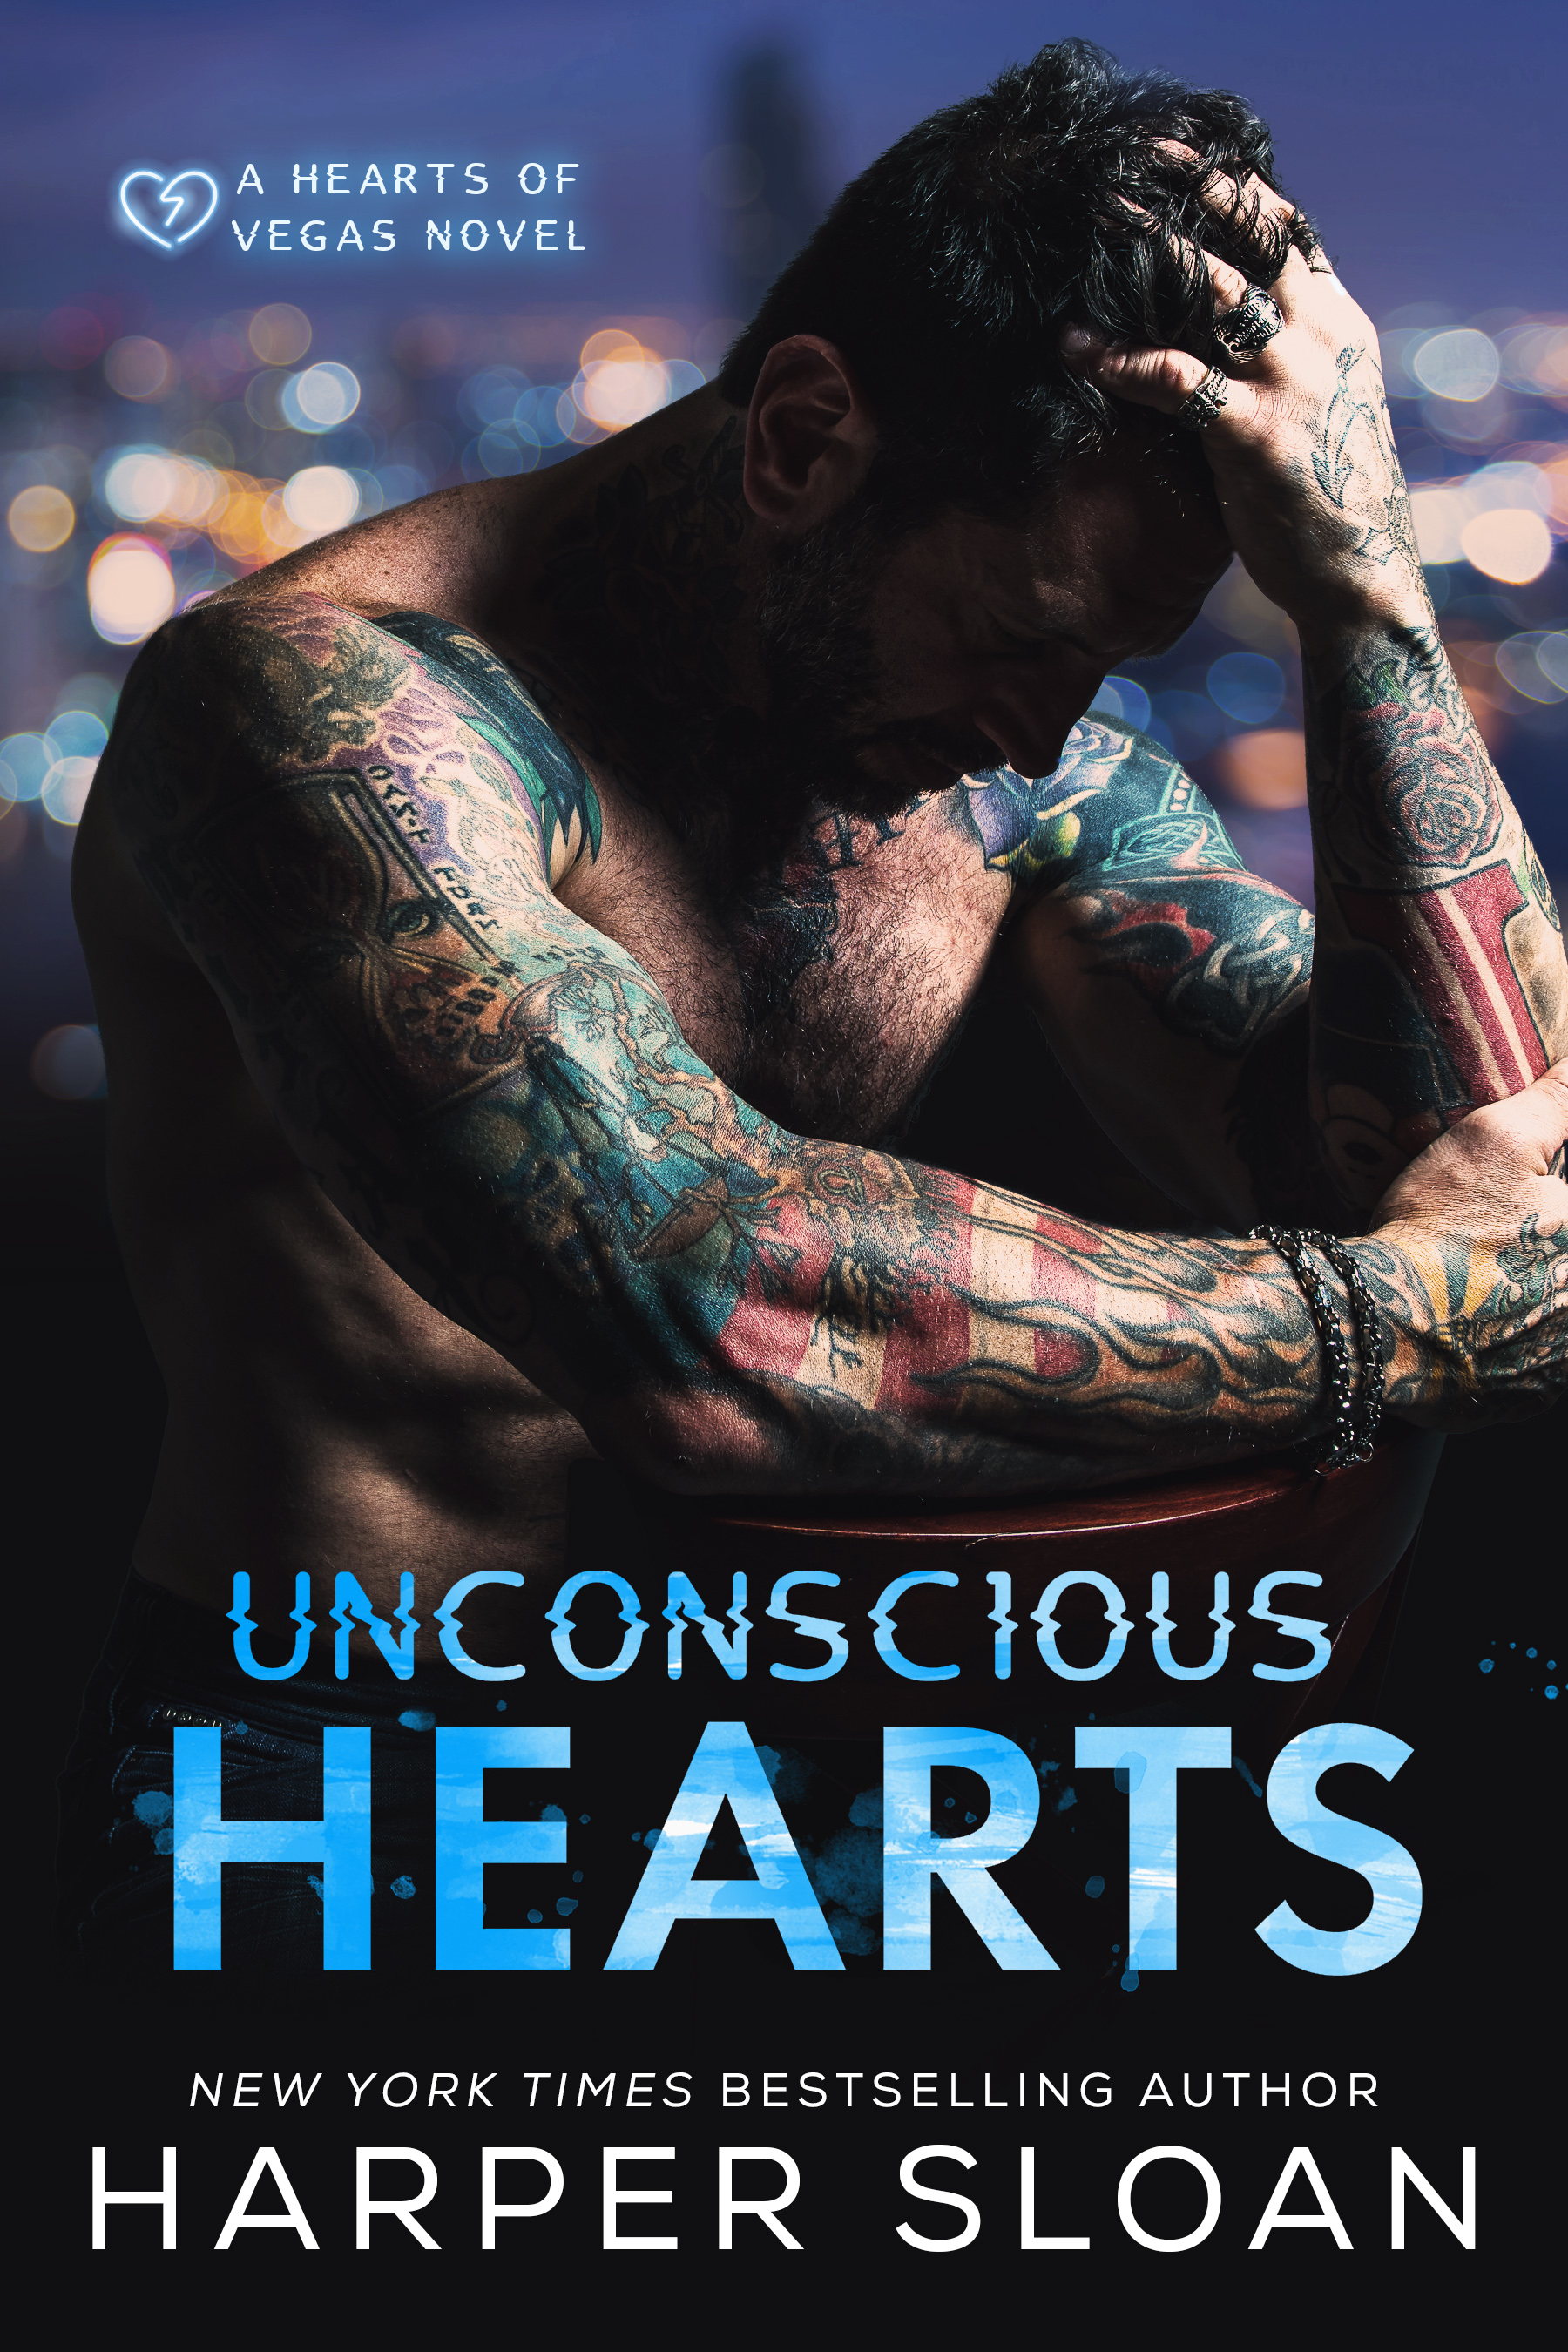 Unconscious Hearts by Harper Sloan [Review]